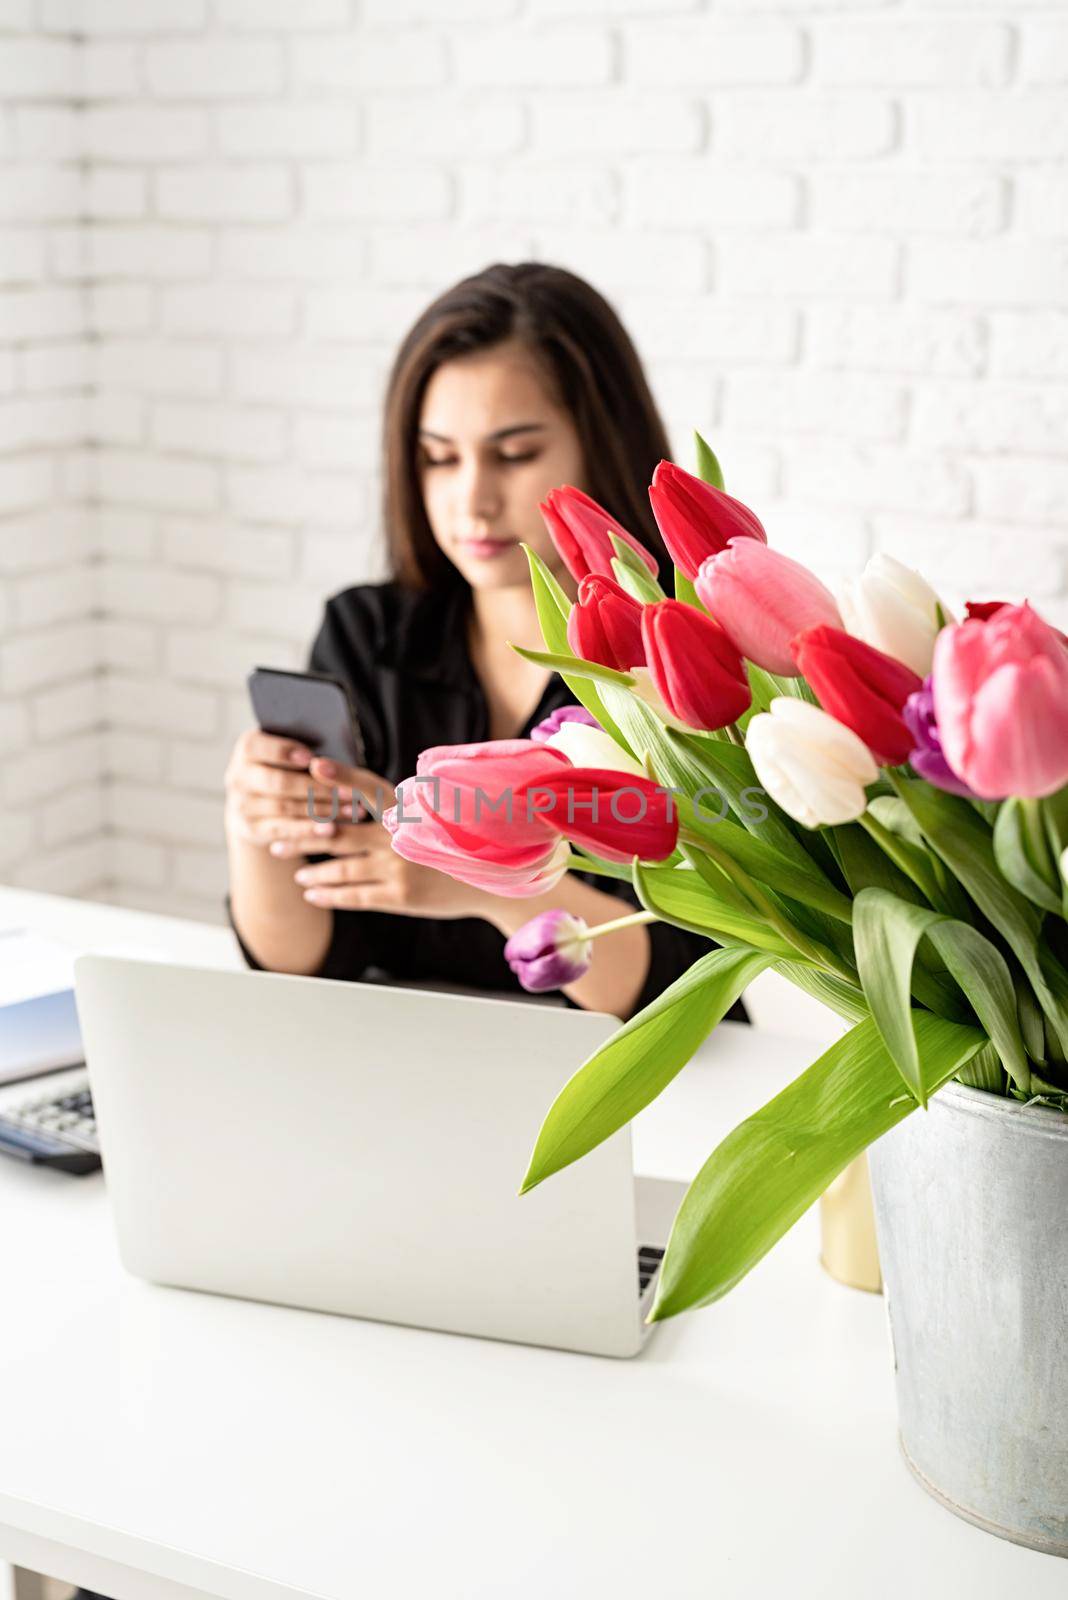 Small business concept. Young serious brunette business woman florist communicating on the phone, working at the office, bucket of tulips on the desk. Focus on flowers. Selective focus